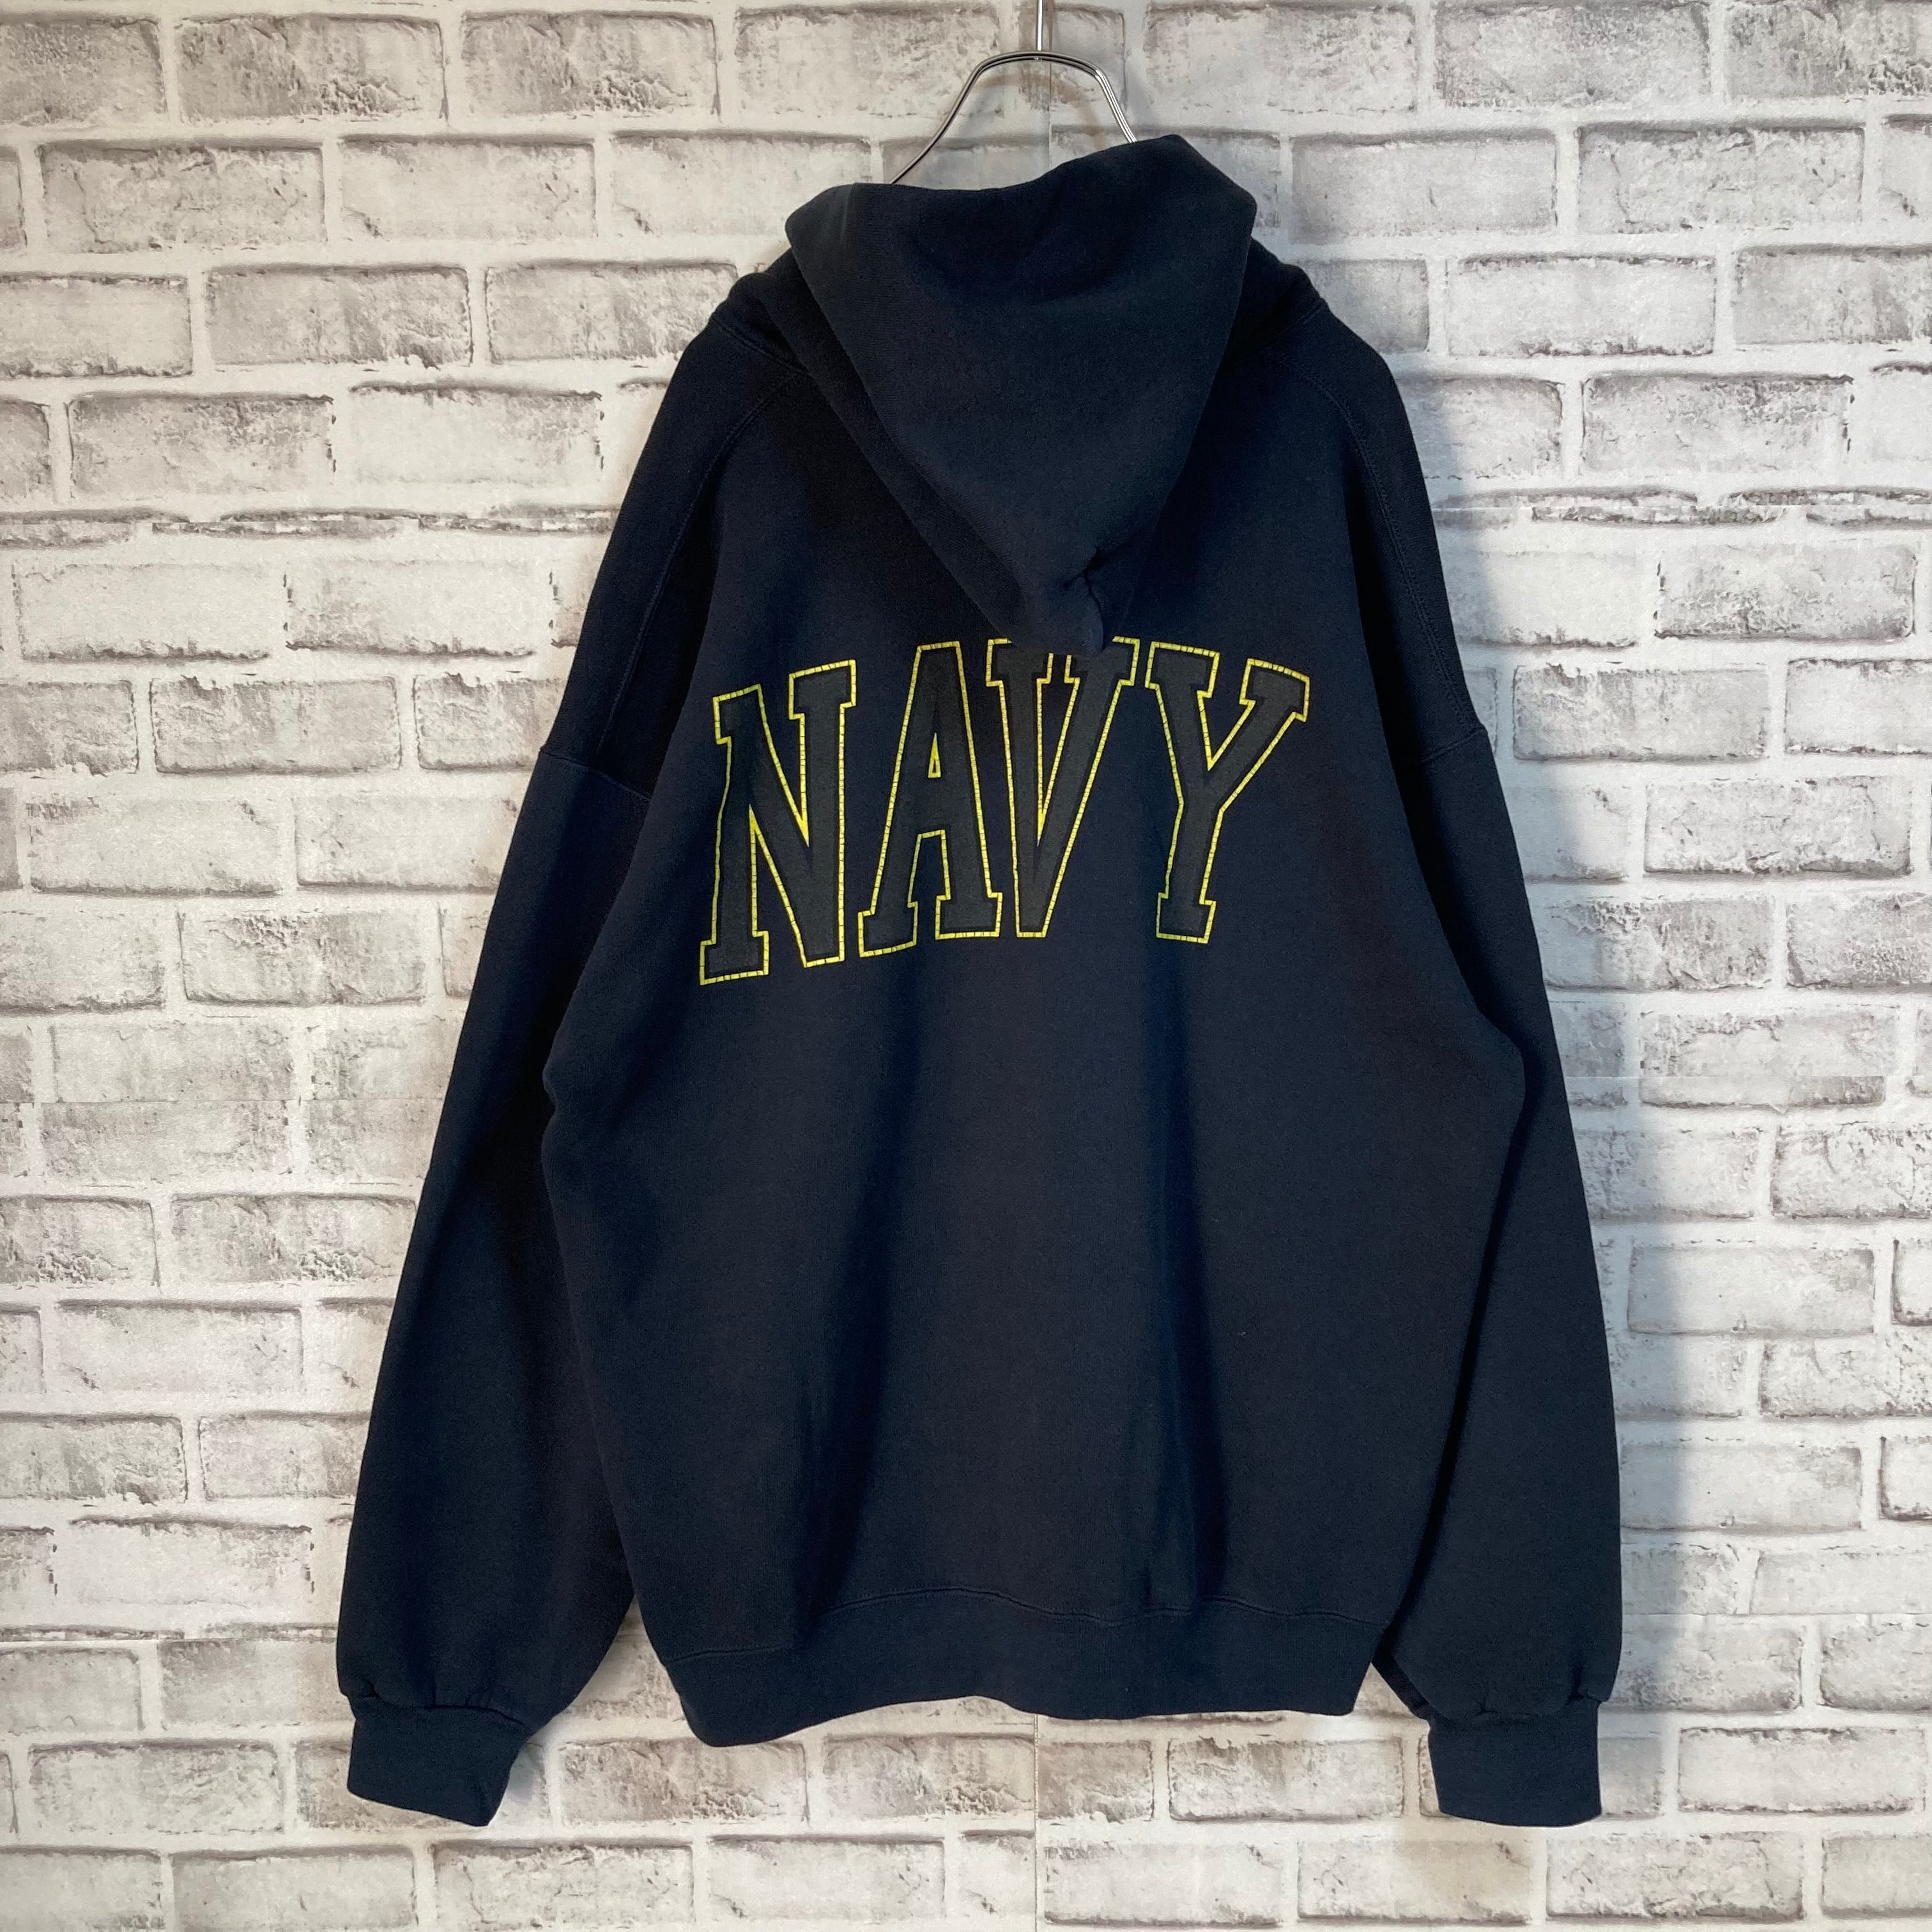 【SOFFE】Pullover Hoodie XL Made in USA 90s “US NAVY” プルオーバーパーカー アメリカ海軍 米軍  軍モノ フーディ センターロゴ バックロゴ アメリカ USA 古着